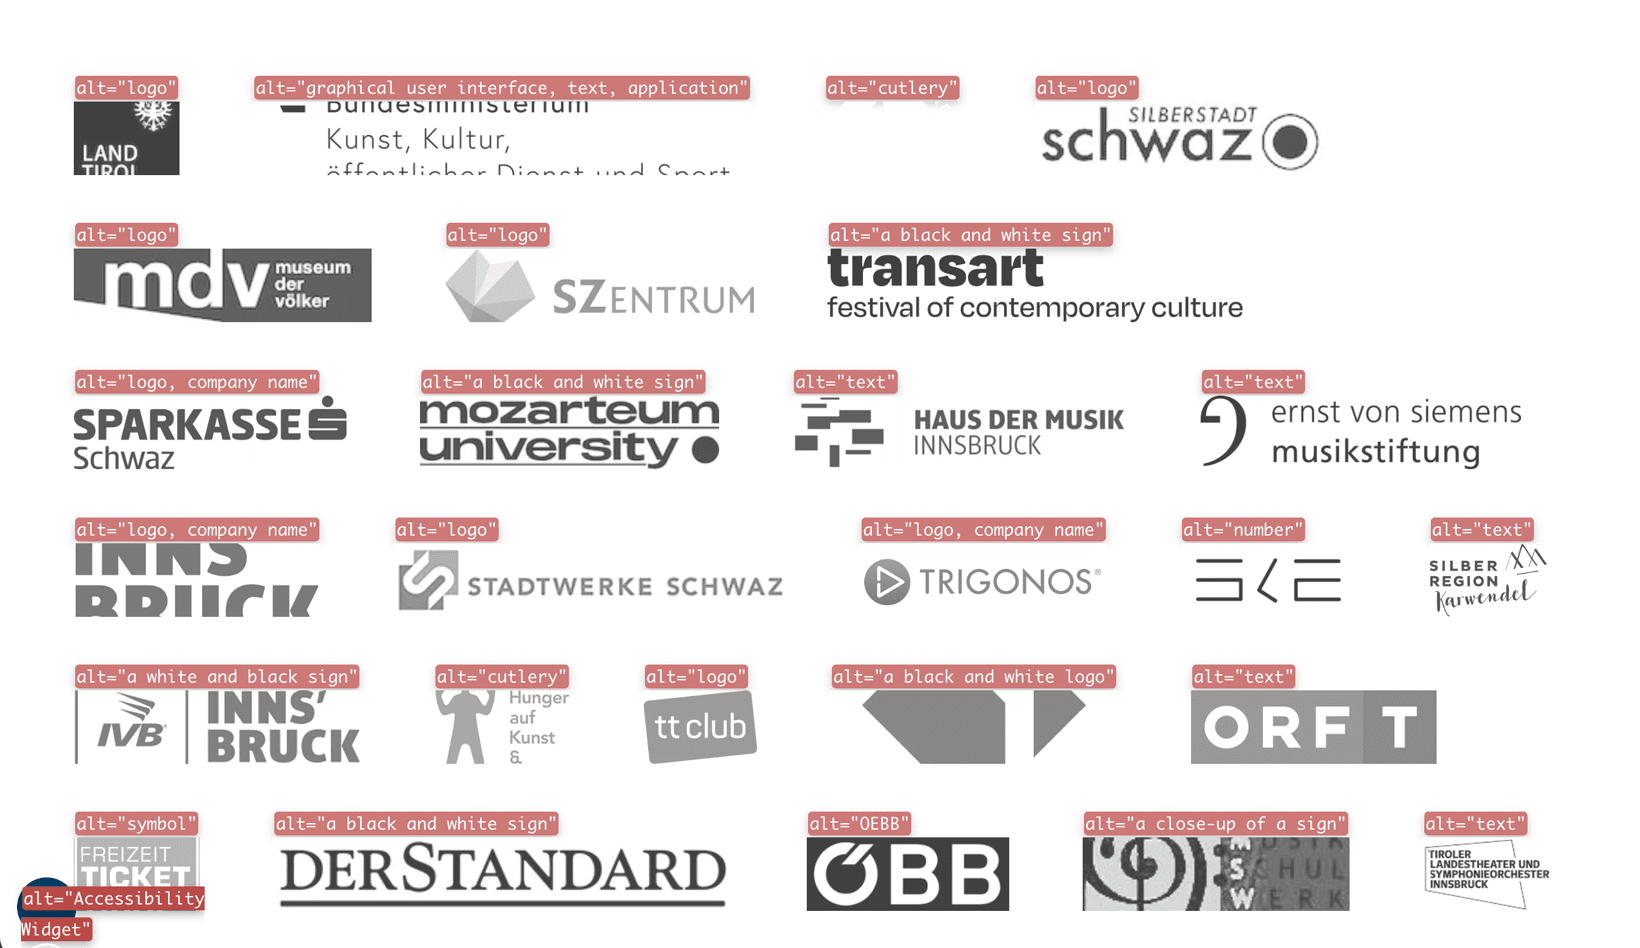 Different company logos and their alternative texts are displayed on a website. The descriptions do not match or describe the logo. Some examples of the displayed logo descriptions are: "logo", "text", "cutlery", "logo, company name", "number", "a close-up of a sign", "a white and black sign", "symbol", and "graphical user interface, text, application".